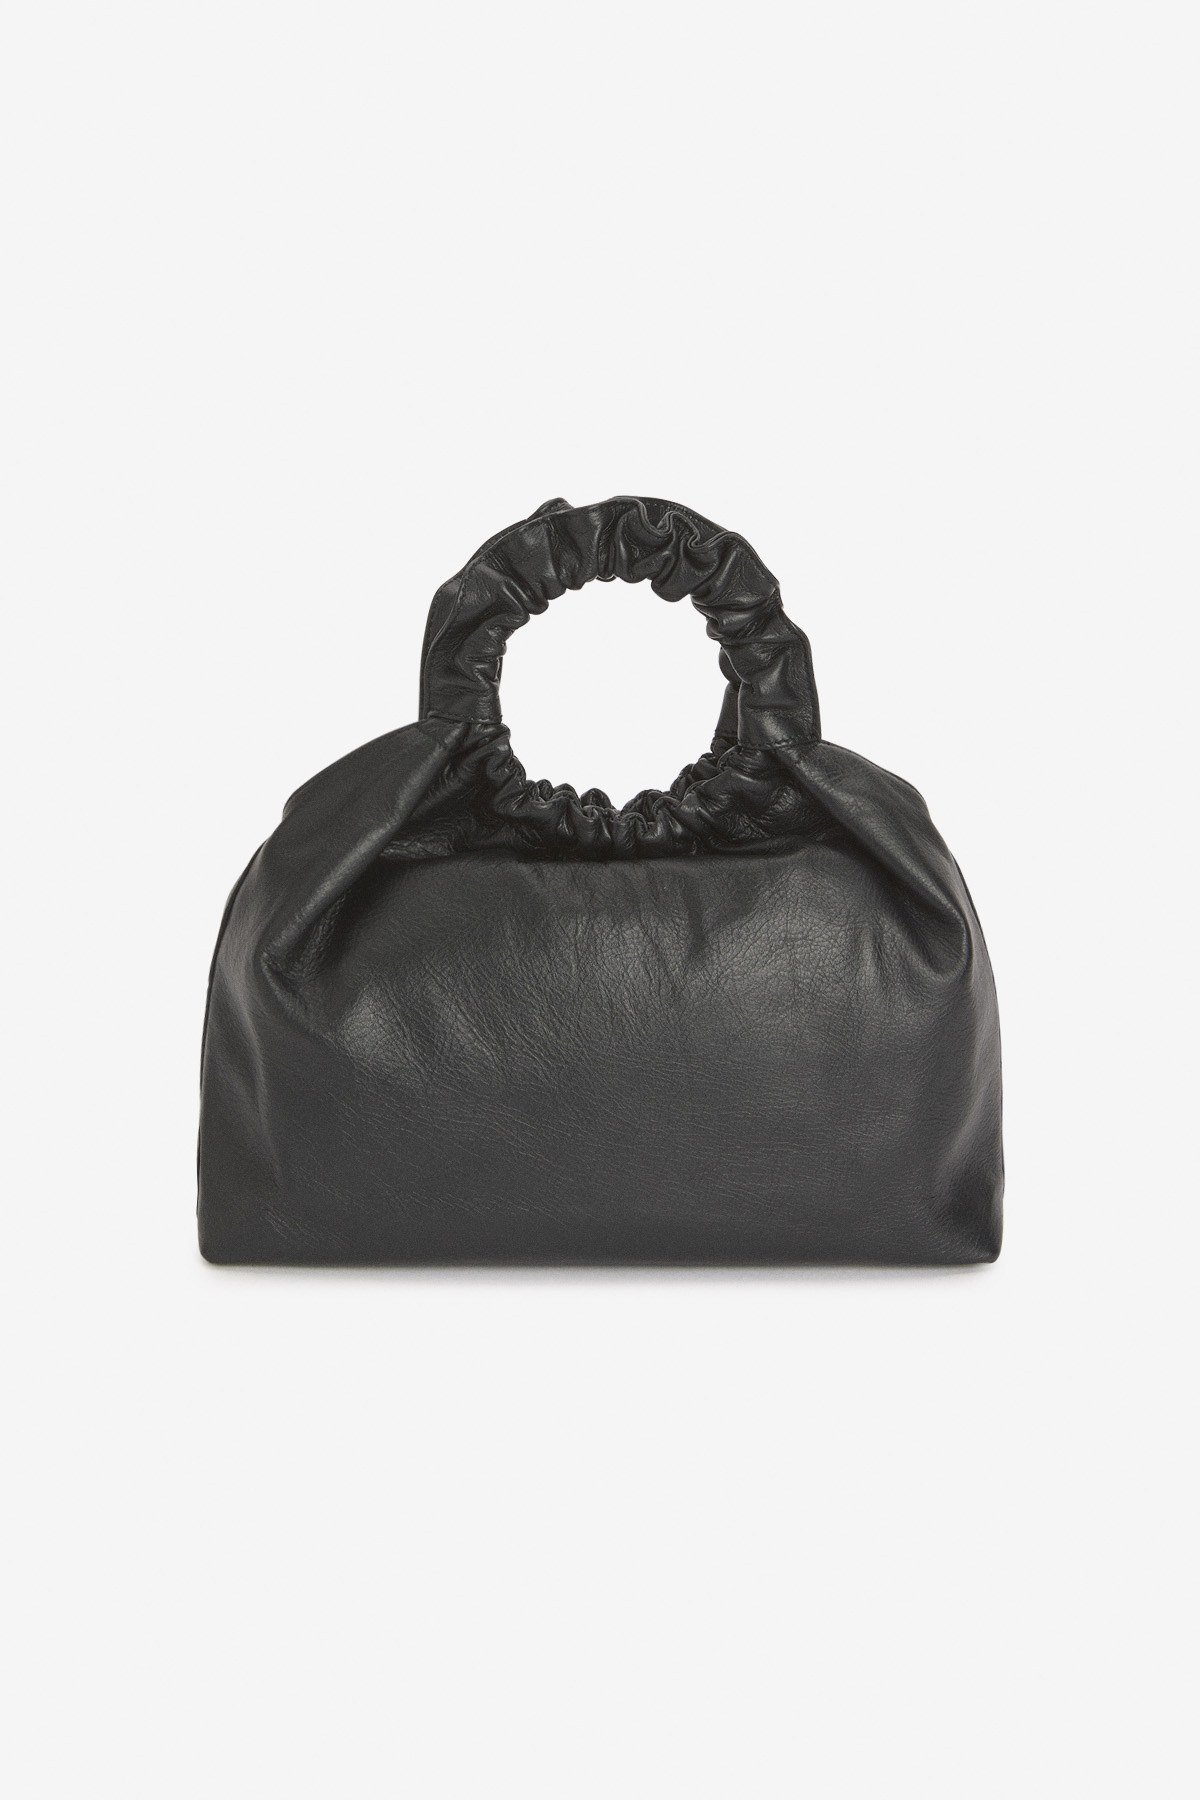 Leather embossed handbag with ring handle